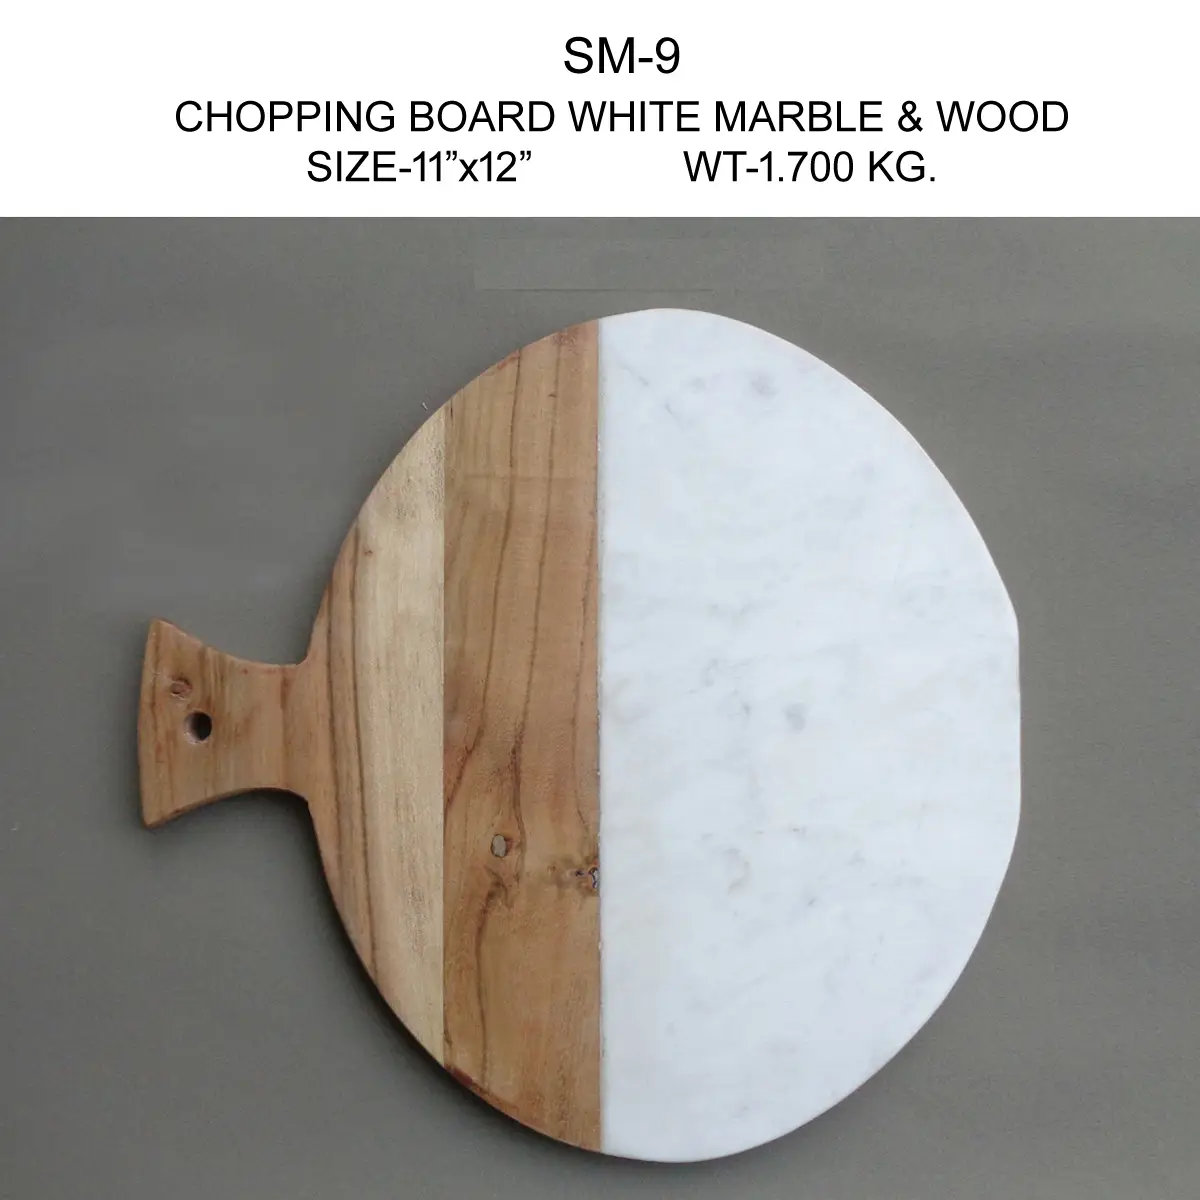 WOOD MARBLE FISH SHAPE CHOPPING BOARD
WITH HANDLE